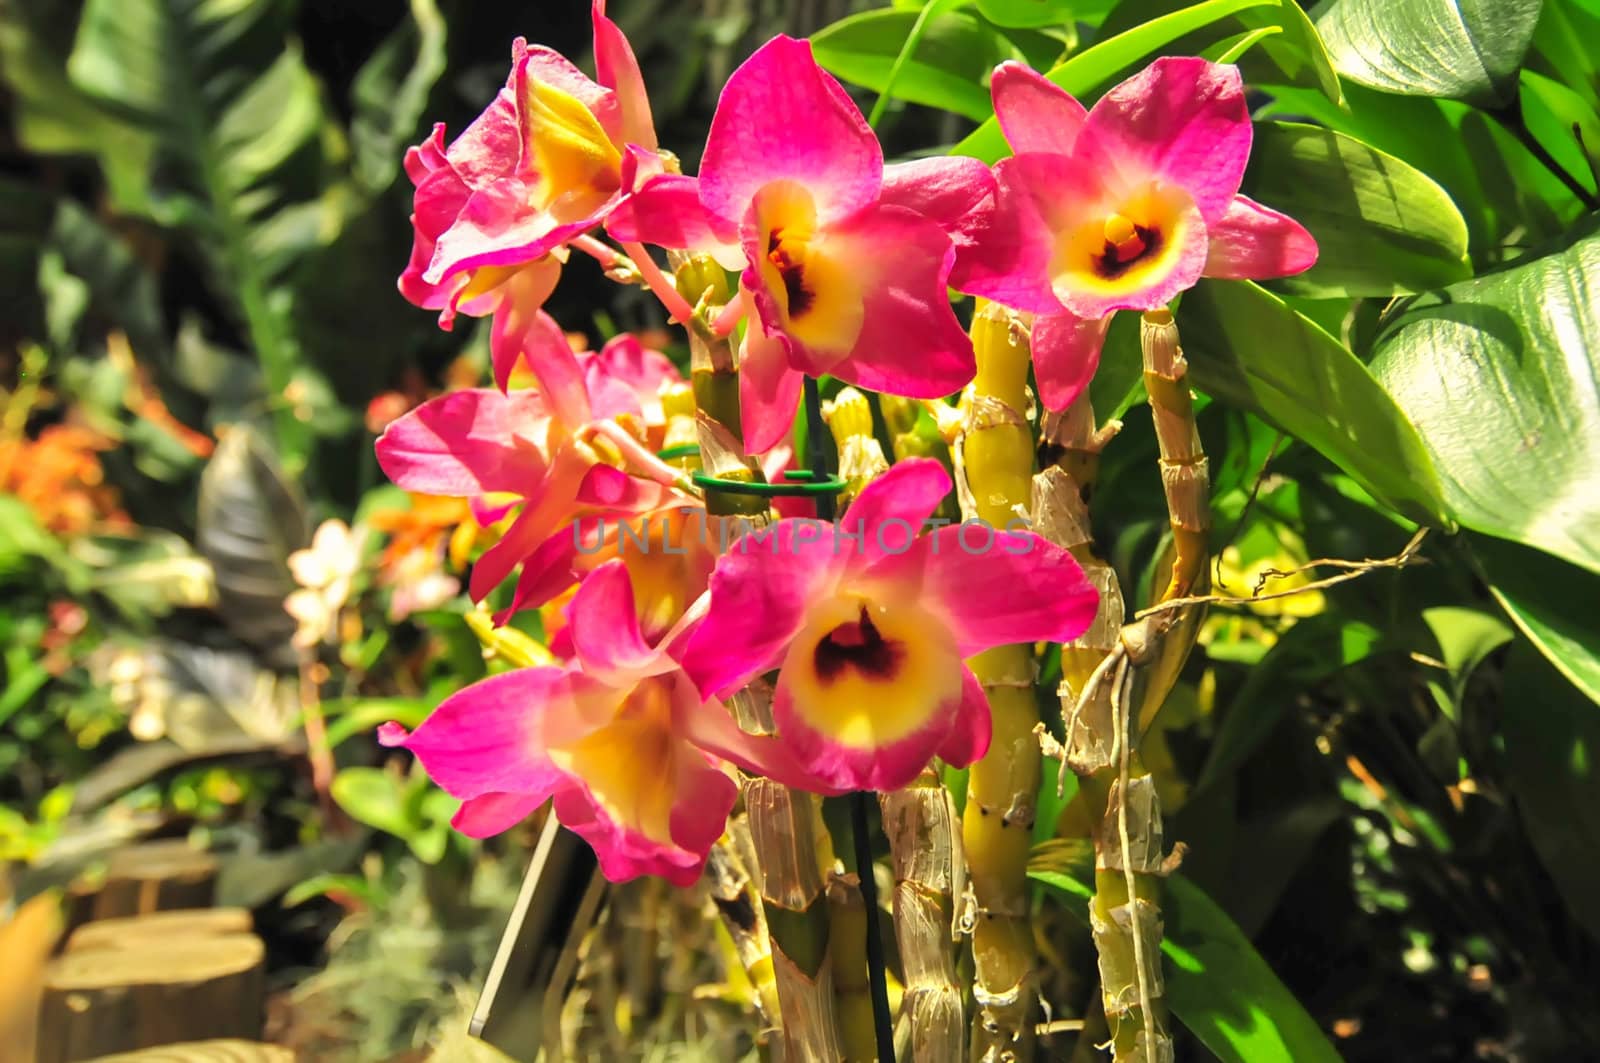 pink orchids blooming in backyard garden by digidreamgrafix